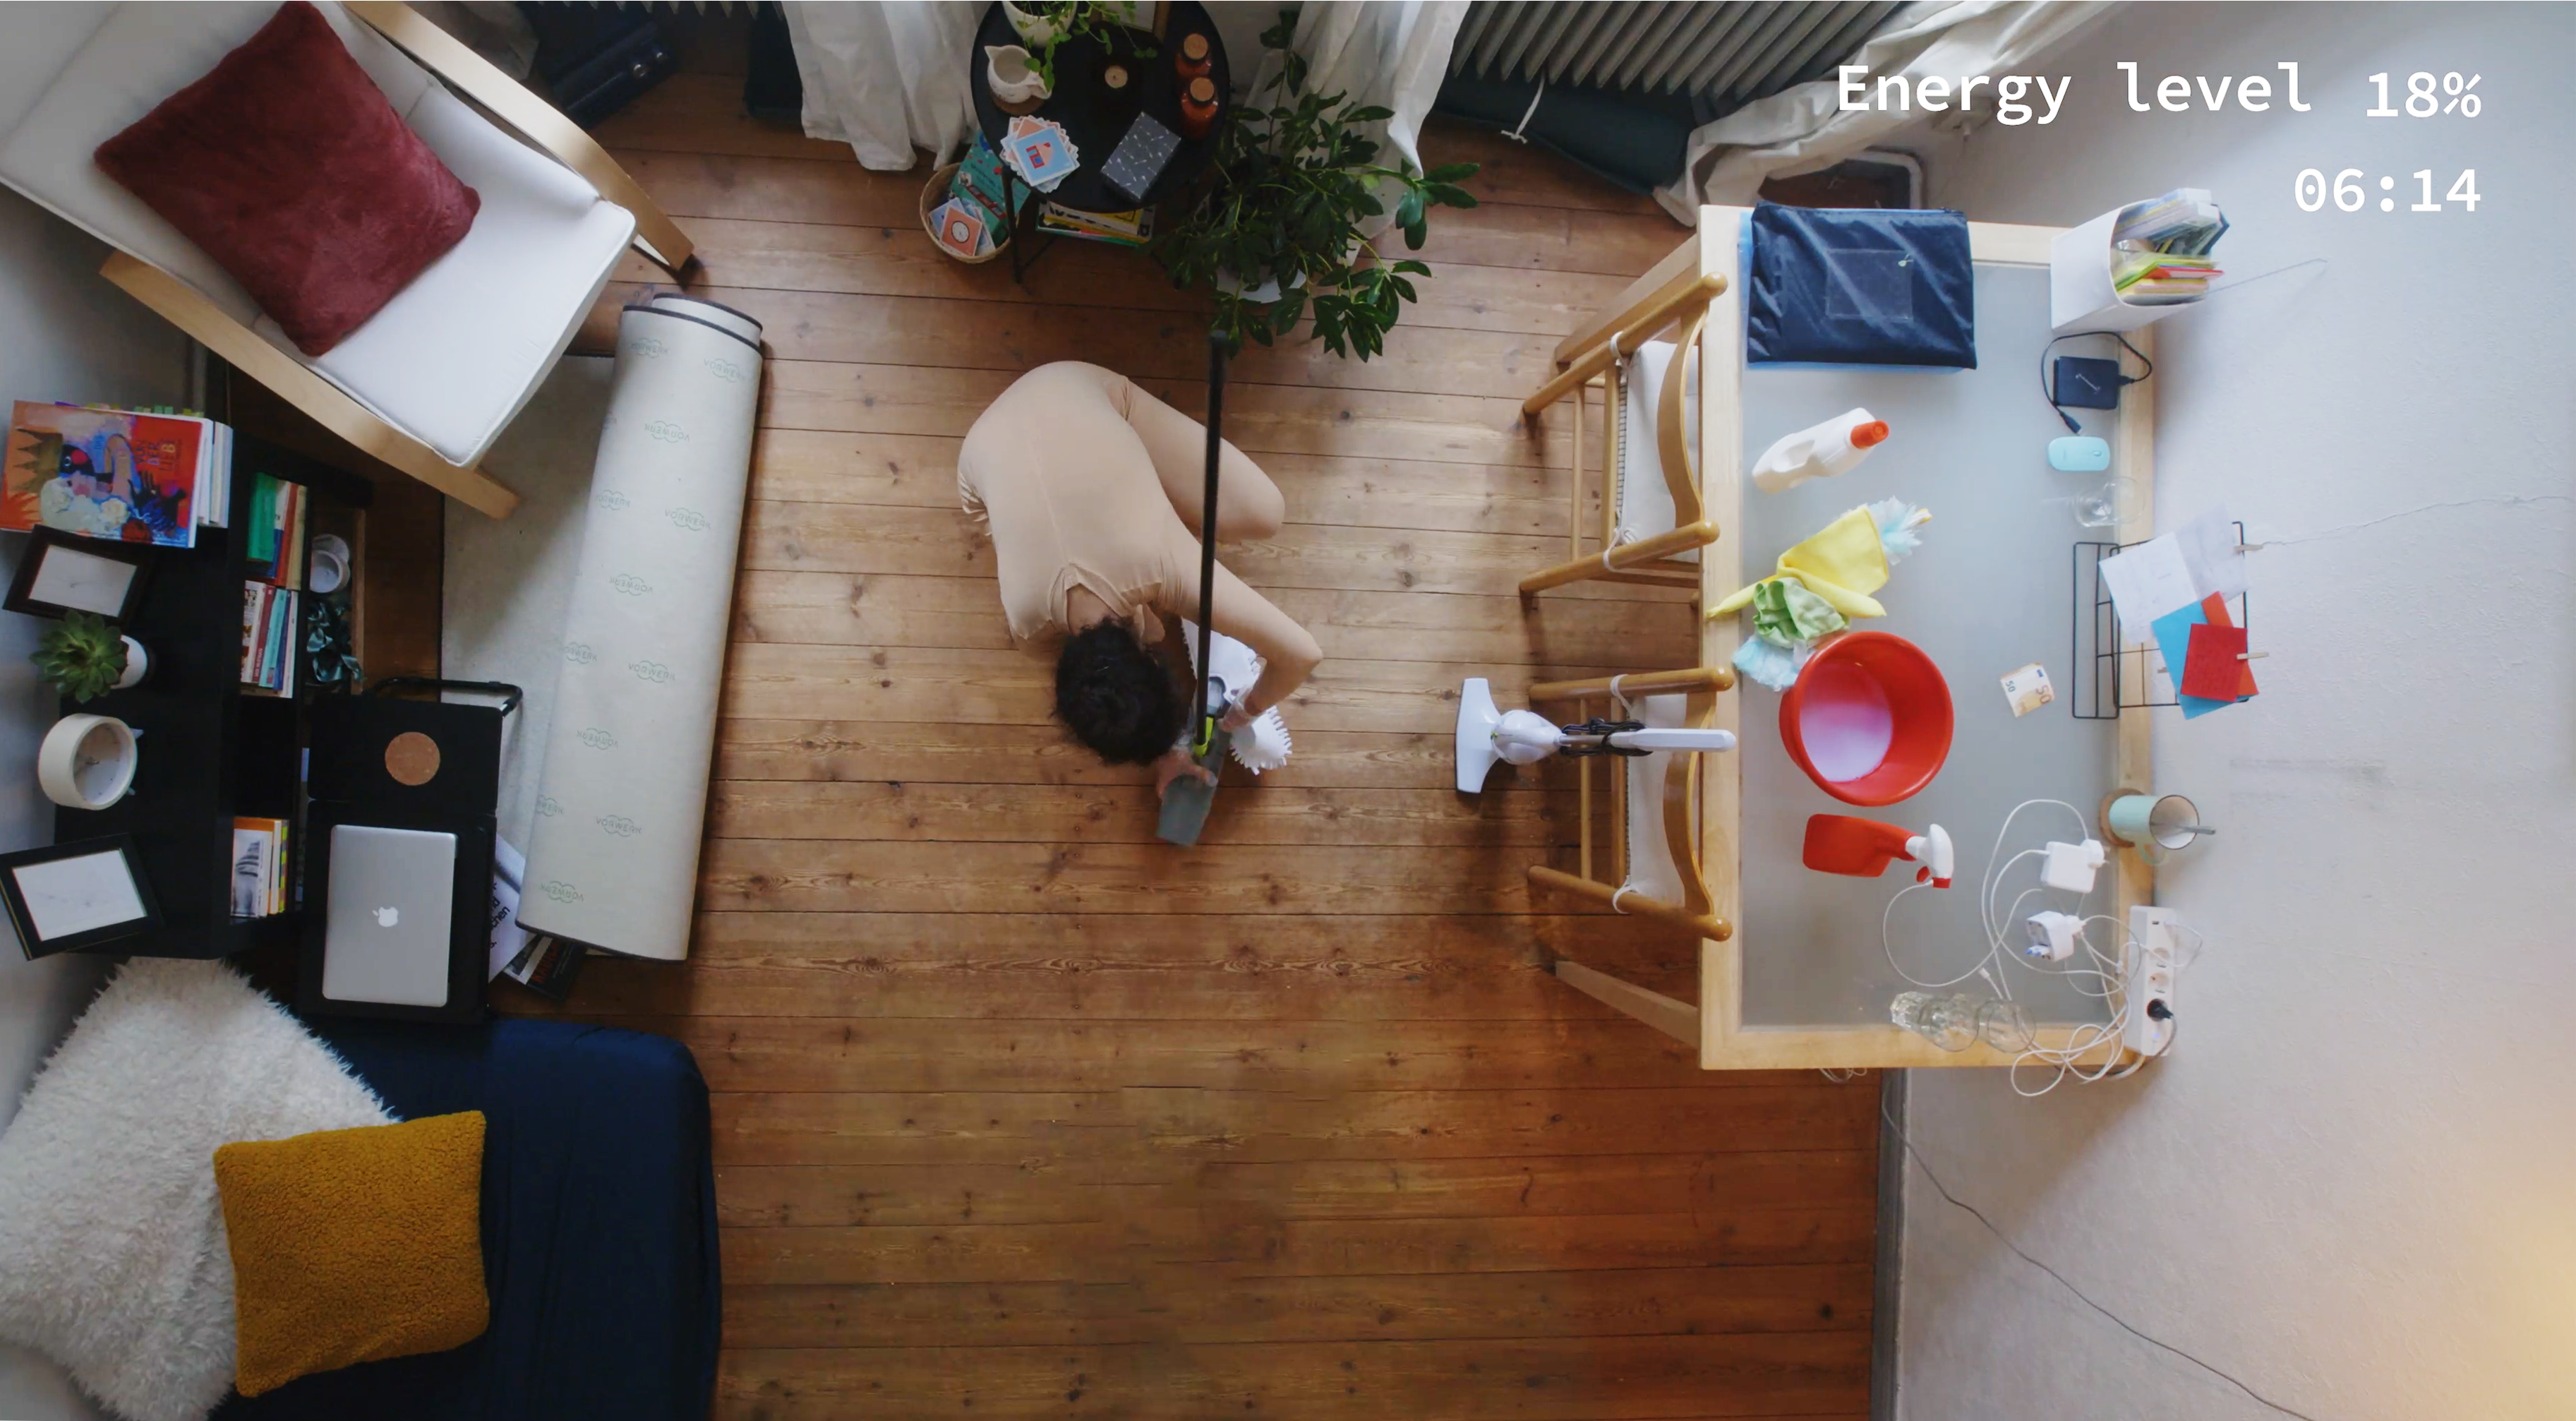 bird's eye view of a woman cleaning a living room, she is crouching on the floor with a mop, other cleaning equipment is visible on a table, text reads: 'energy level 18%, 06:14'